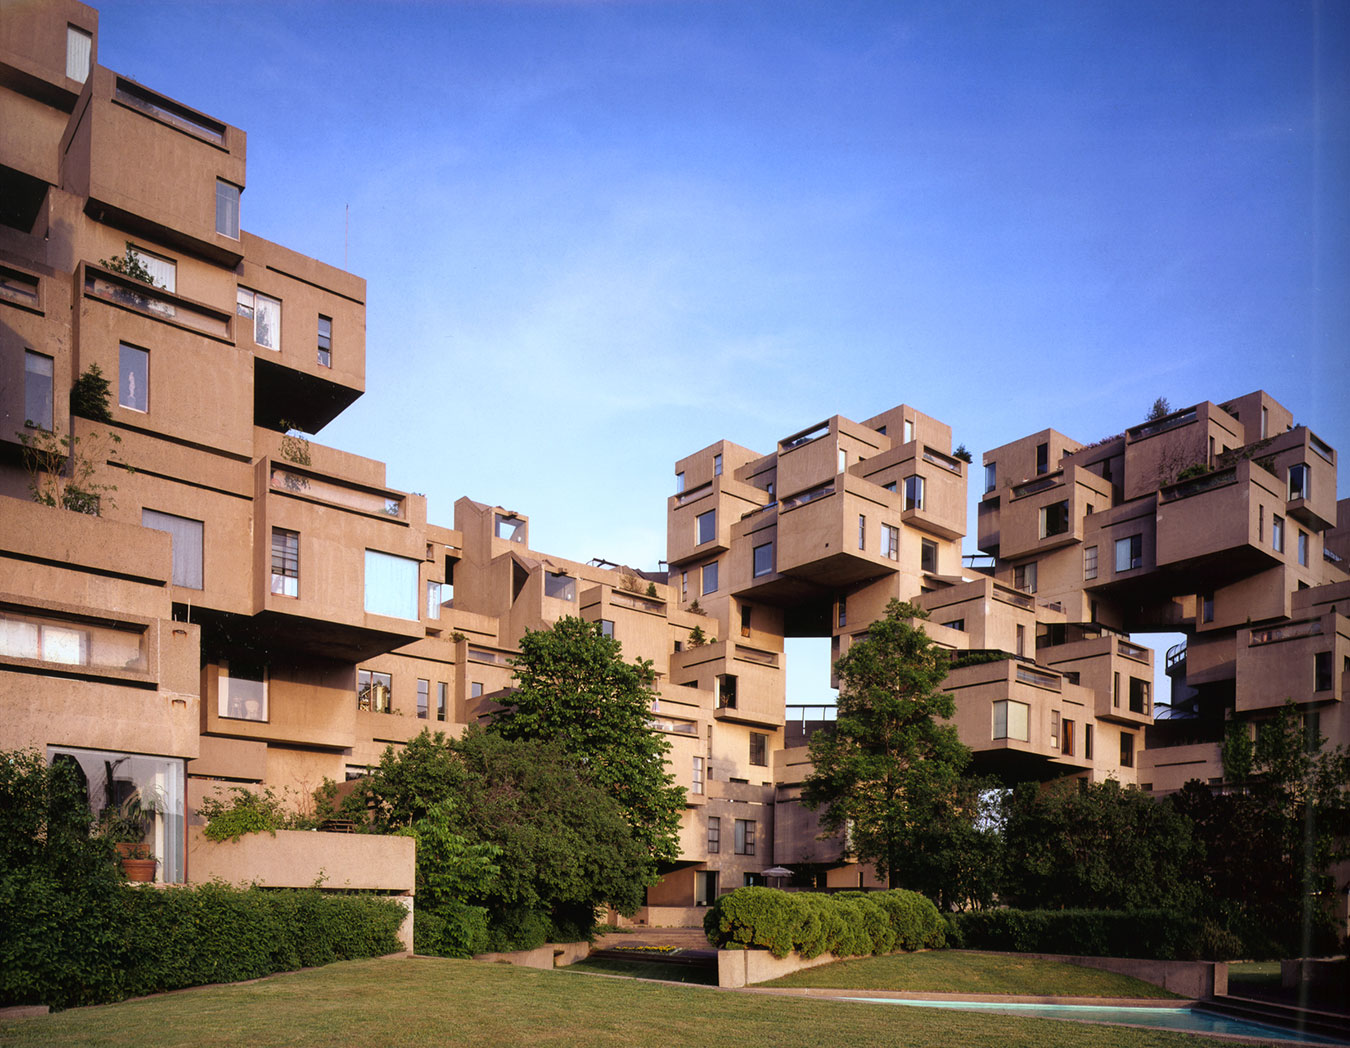 NUVO Blog: The Projects of Moshe Safdie